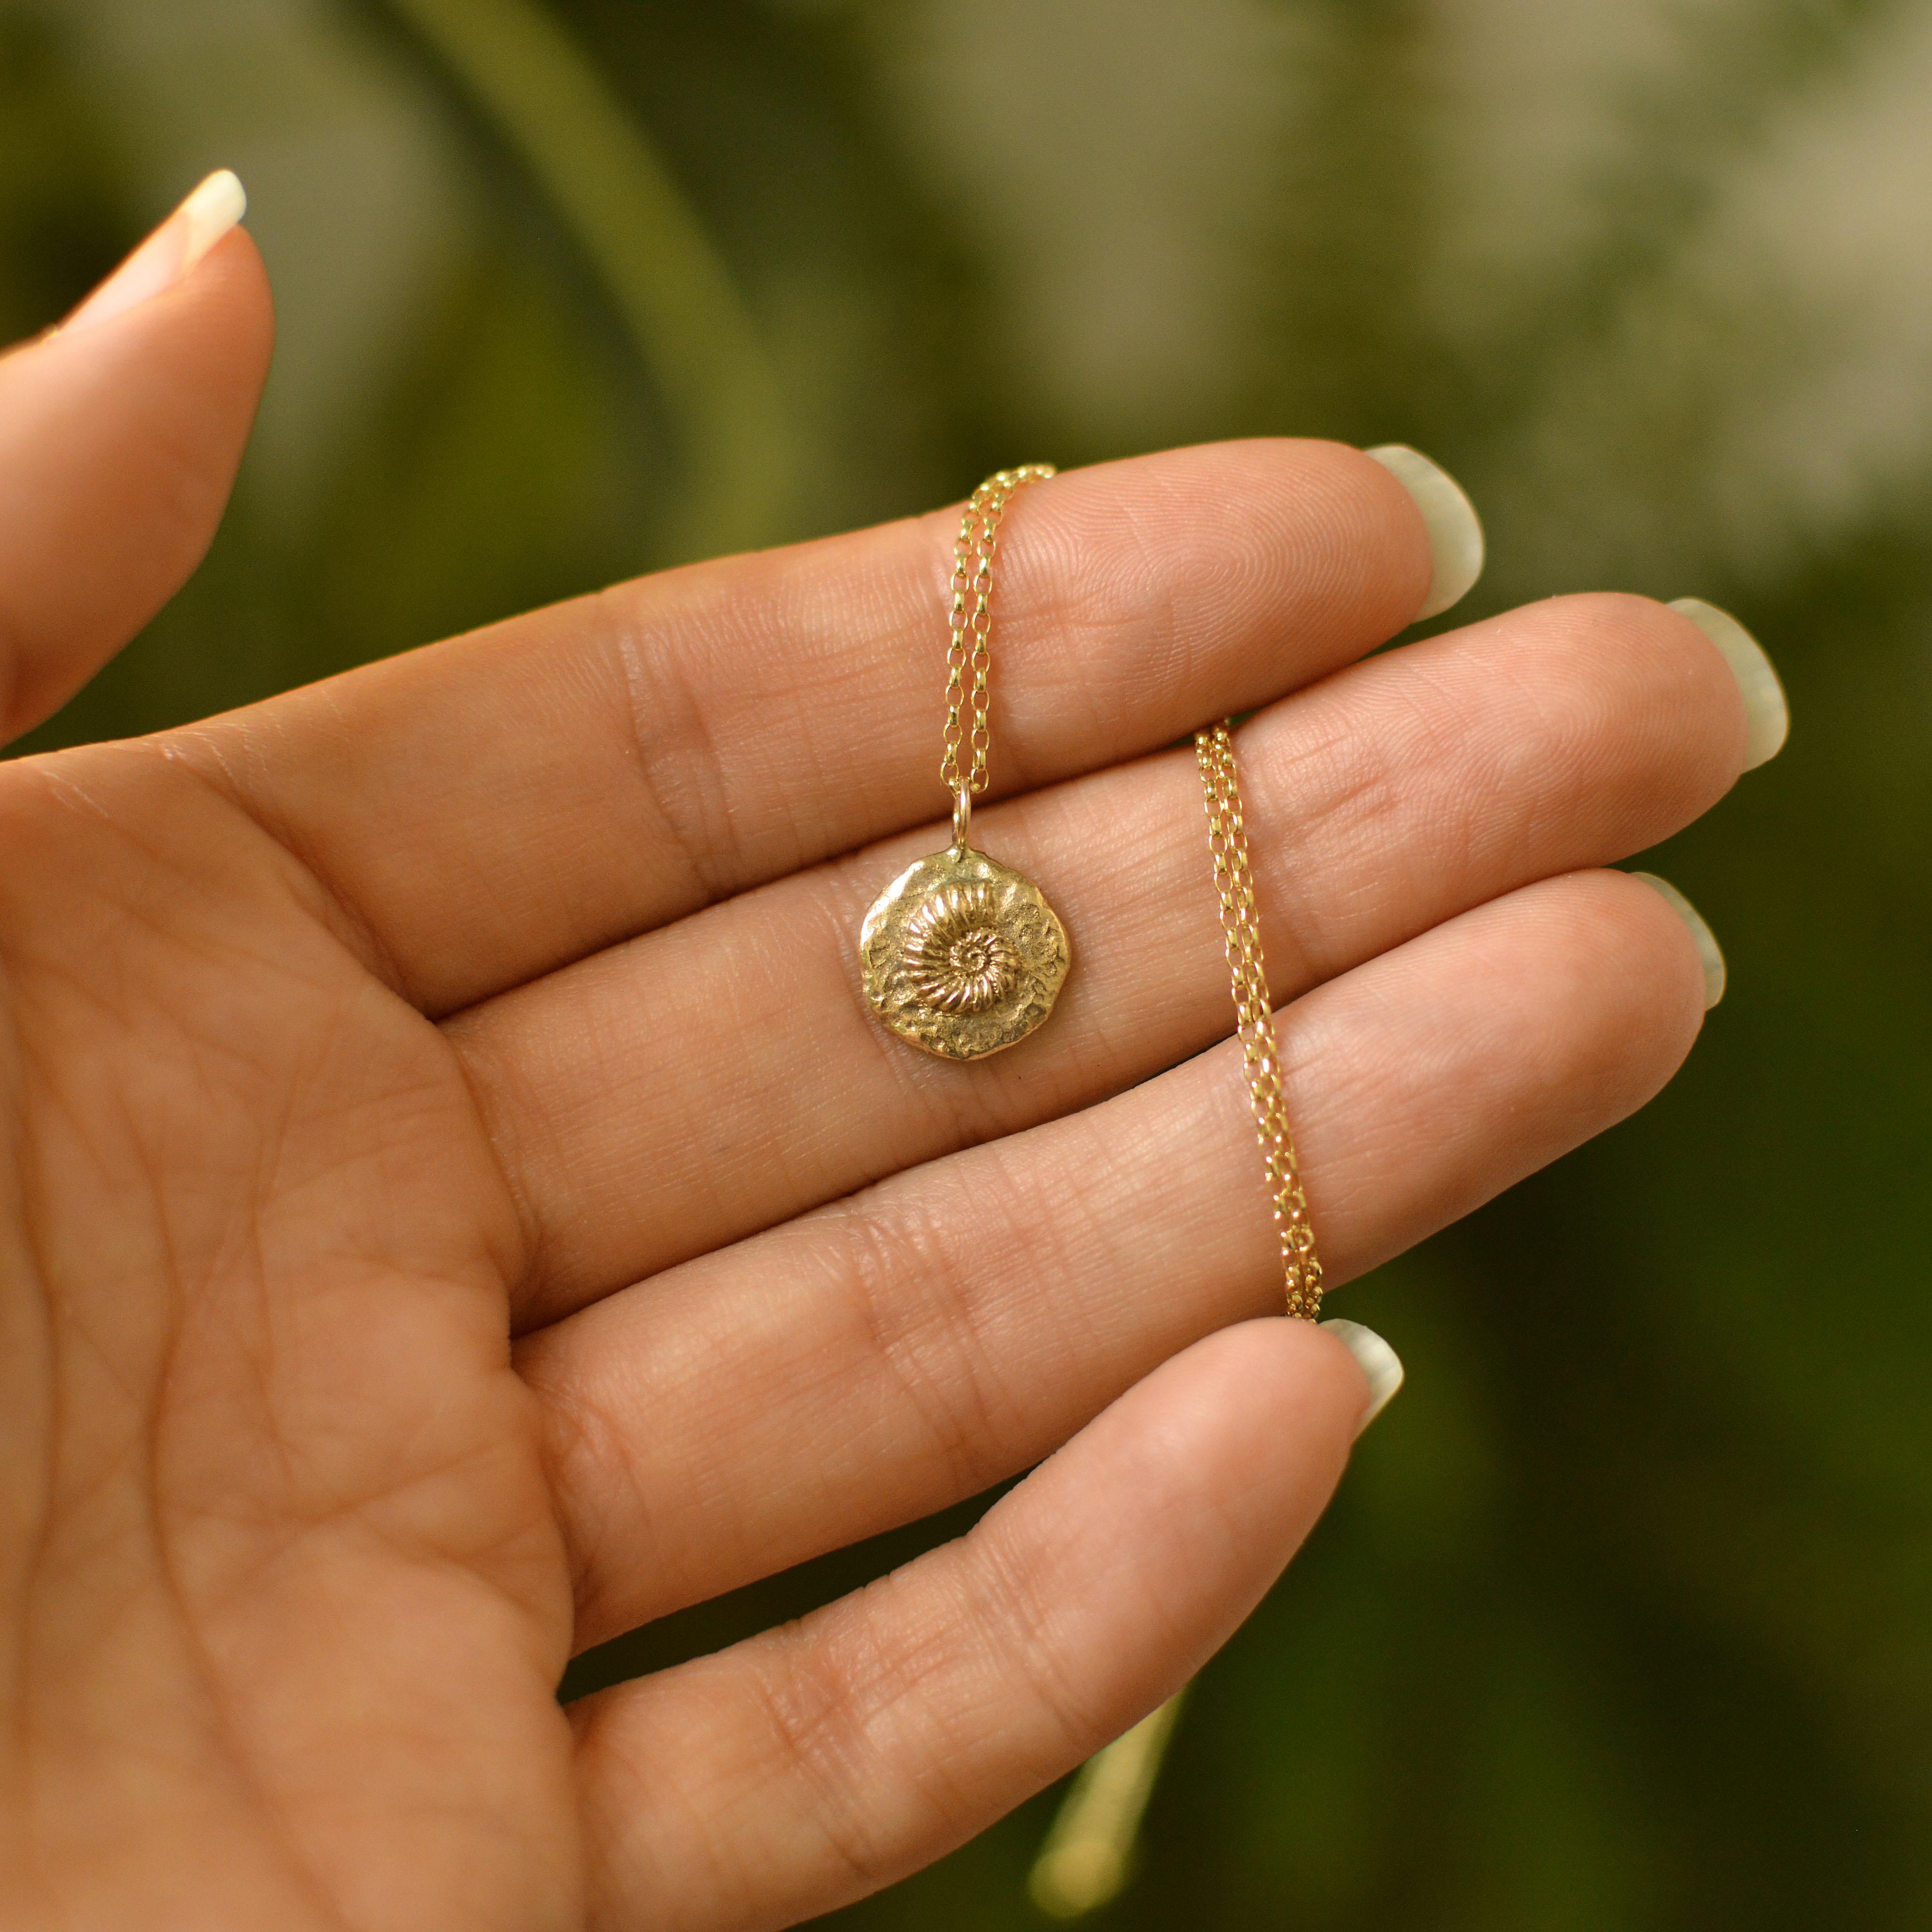 This dainty ammonite fossil pedant is cast in solid 18 Carat gold and finished by hand, and is created from Lucy's original hand-sculpted design. 

This ammonite pendant is made in London, United Kingdom using recycled or fairtrade Gold. Metals are